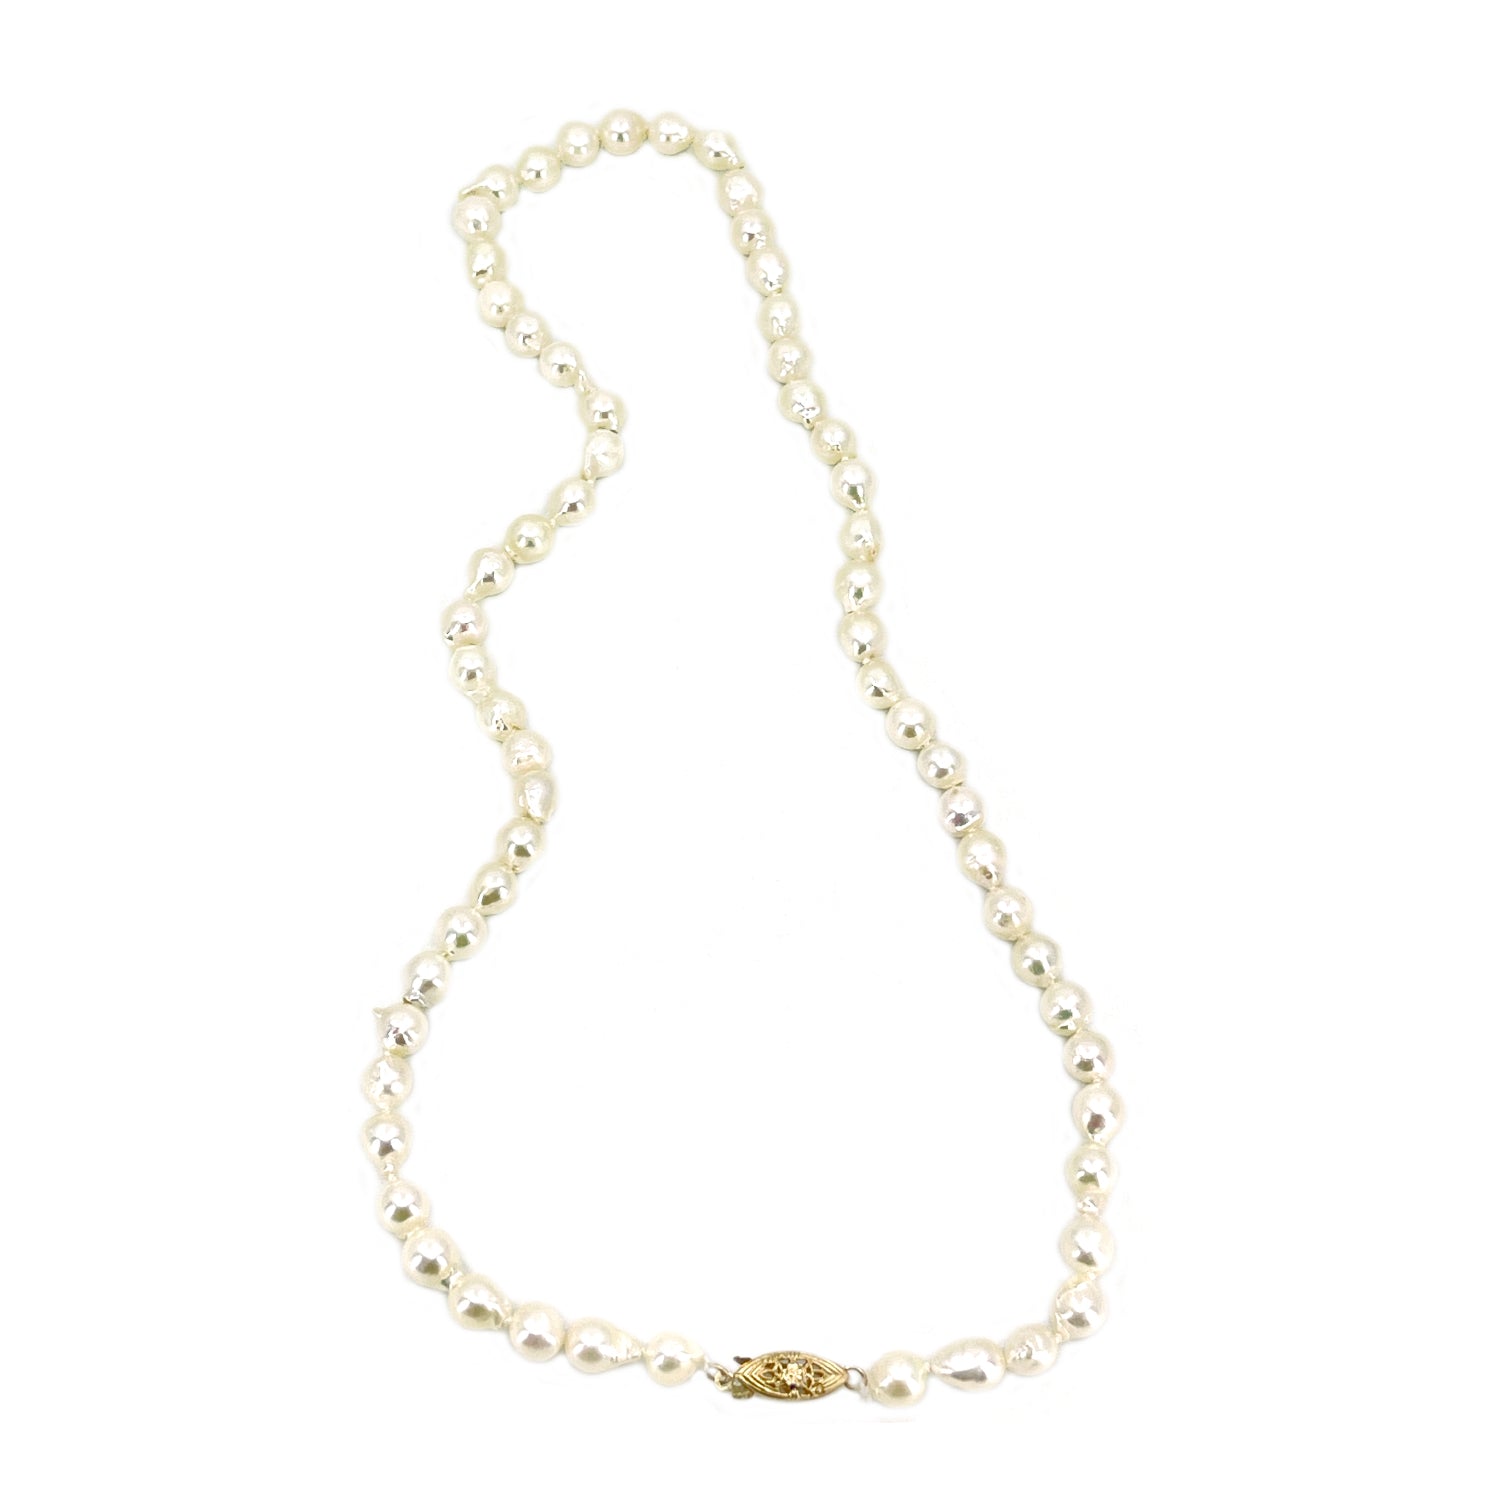 Modernist Baroque Japanese Cultured Akoya Pearl Vintage Necklace - 14K Yellow Gold 19.50 Inch